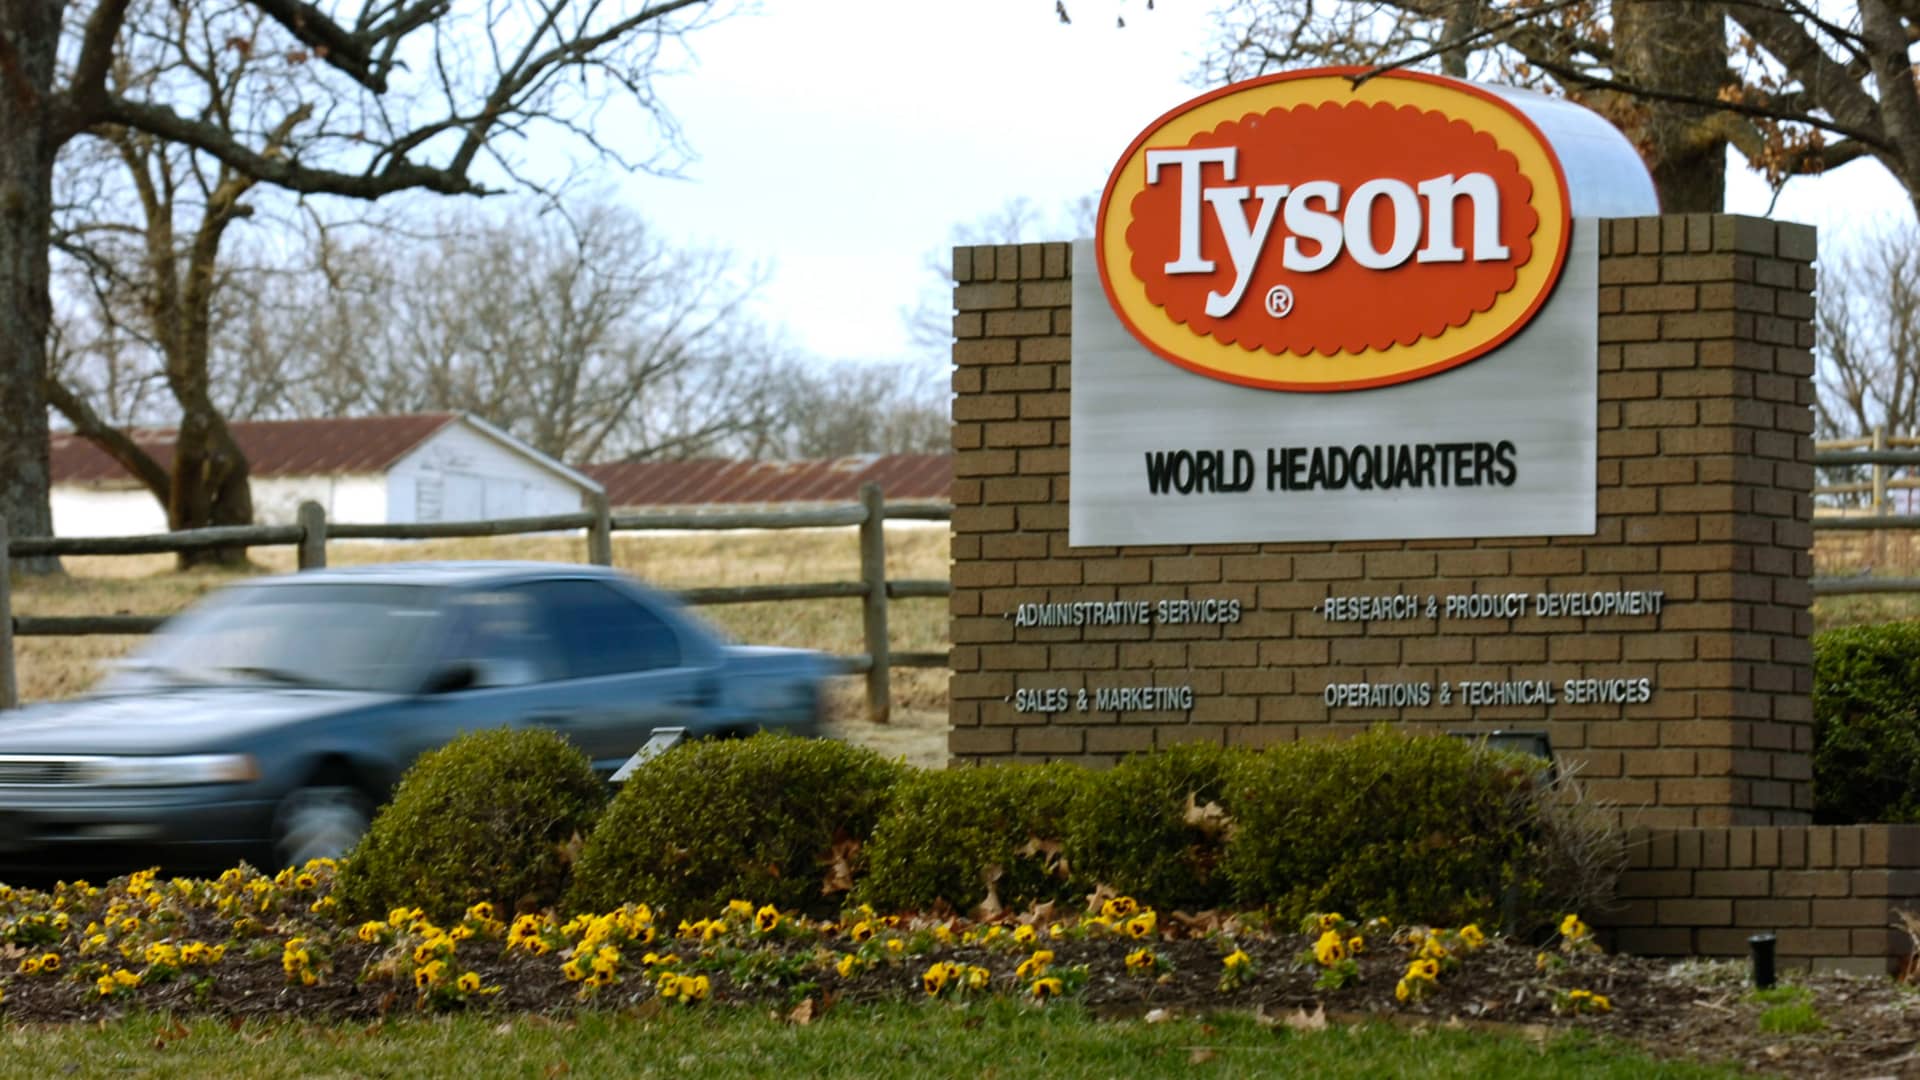 Tyson Foods drops CVS for upstart pharmacy benefit manager, as industry upheaval over cost concerns spreads